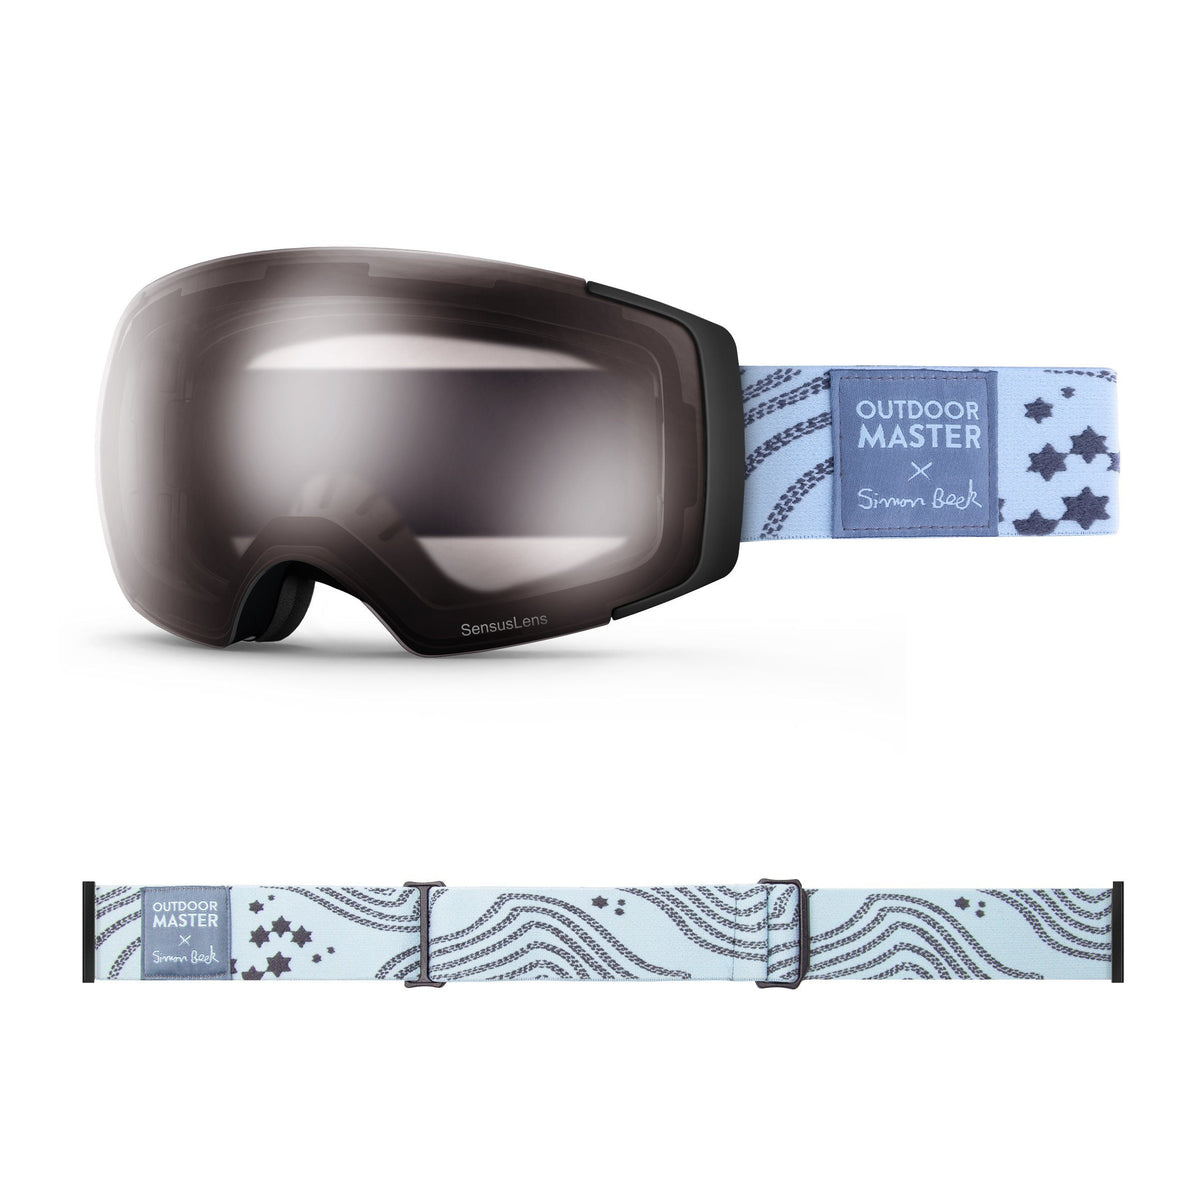 OutdoorMaster x Simon Beck Ski Goggles Pro Series - Snowshoeing Art Limited Edition OutdoorMaster SensusLens VLT40-80% Photochromatic Clear to 